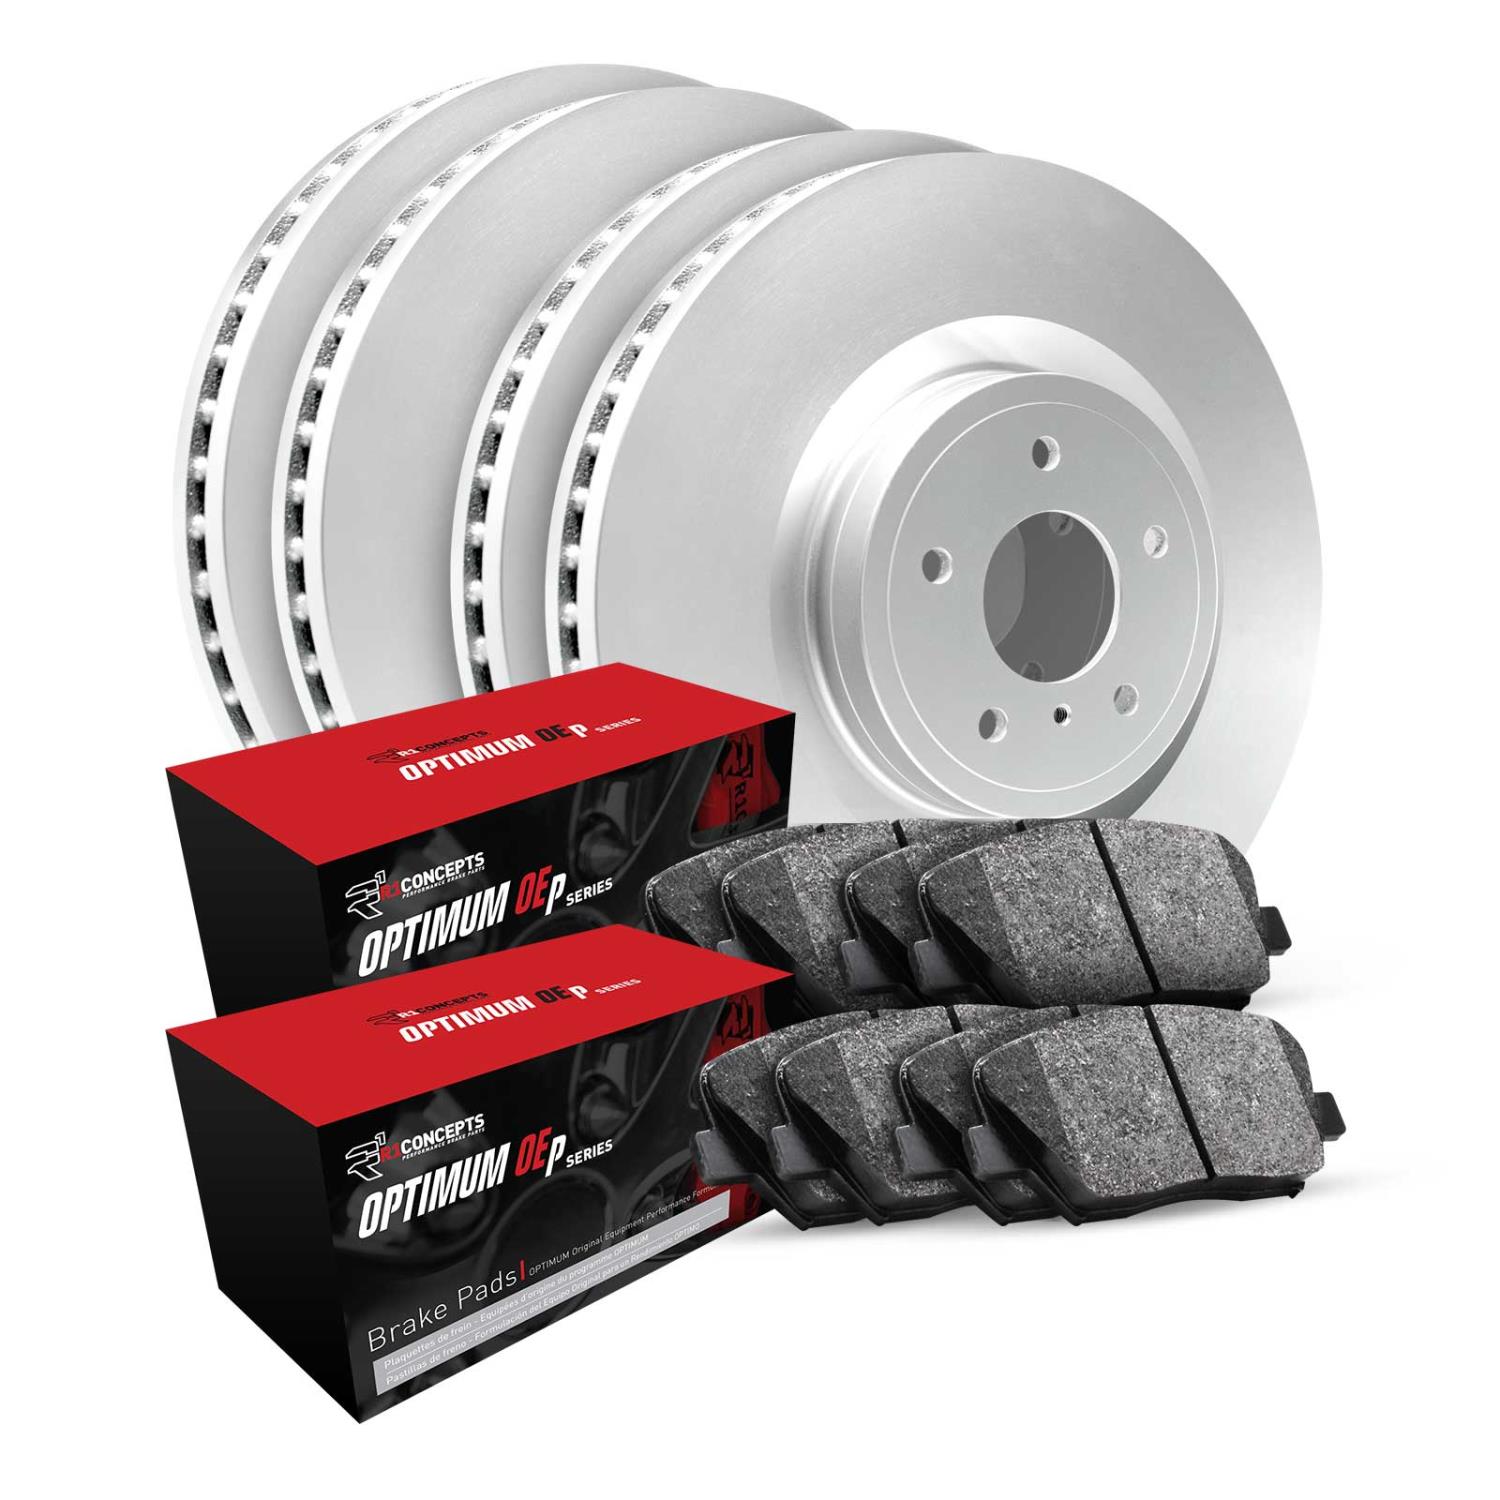 GEO-Carbon Brake Rotor Set w/Optimum OE Pads, 2017-2019 Fits Multiple Makes/Models, Position: Front & Rear